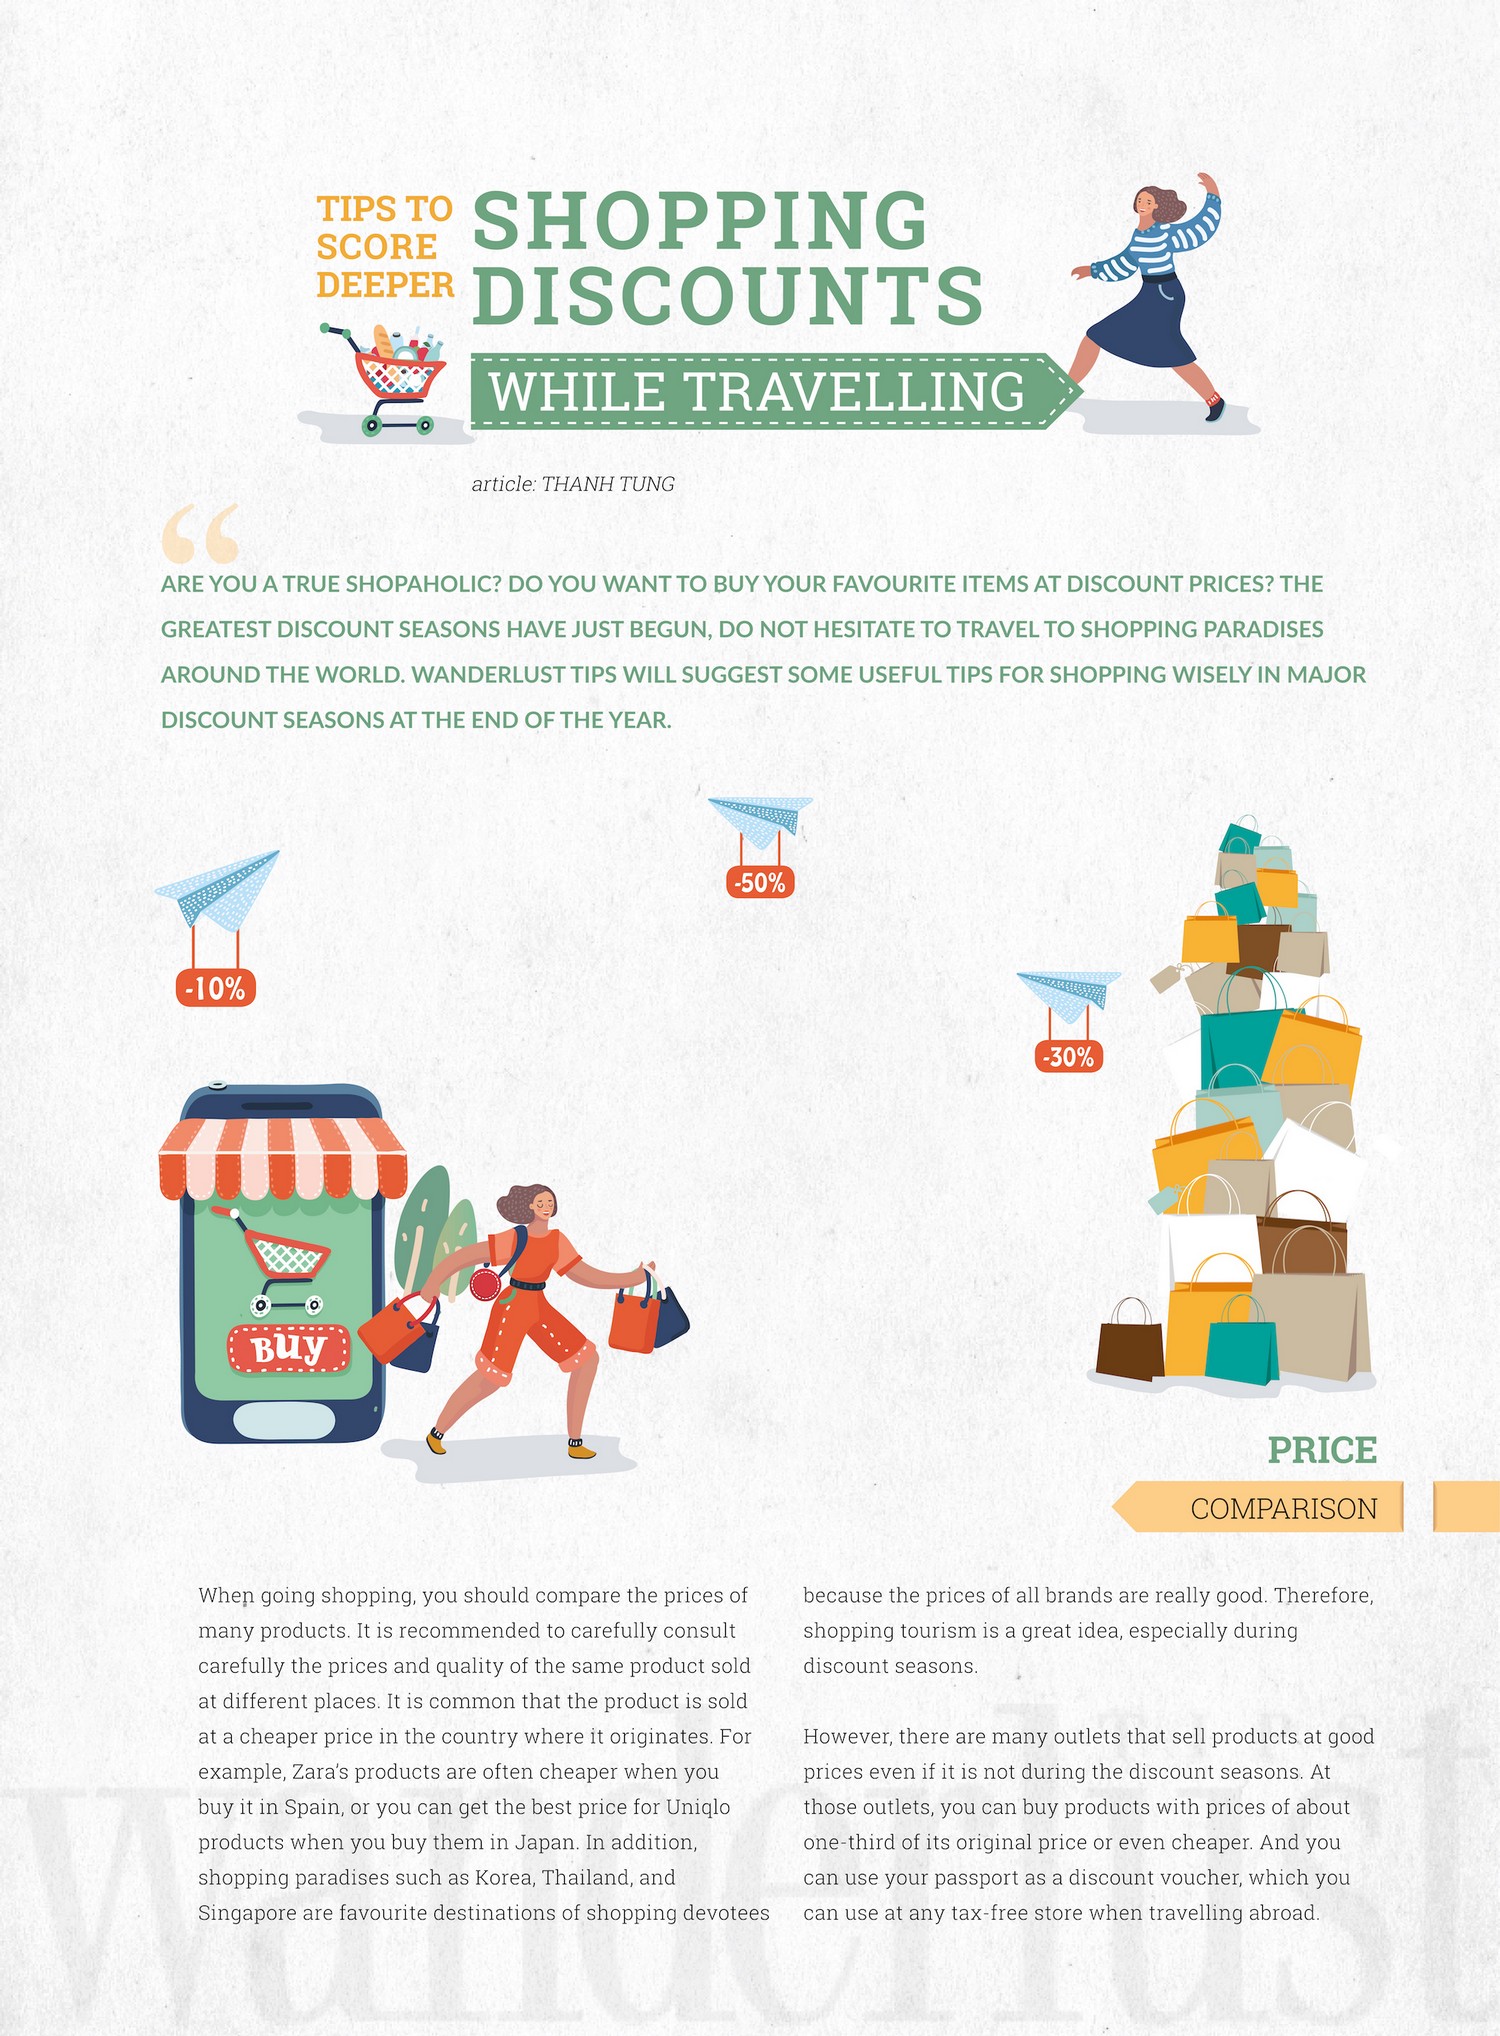 Wanderlust Tips Magazine | Tips to score deeper shopping discounts while travelling